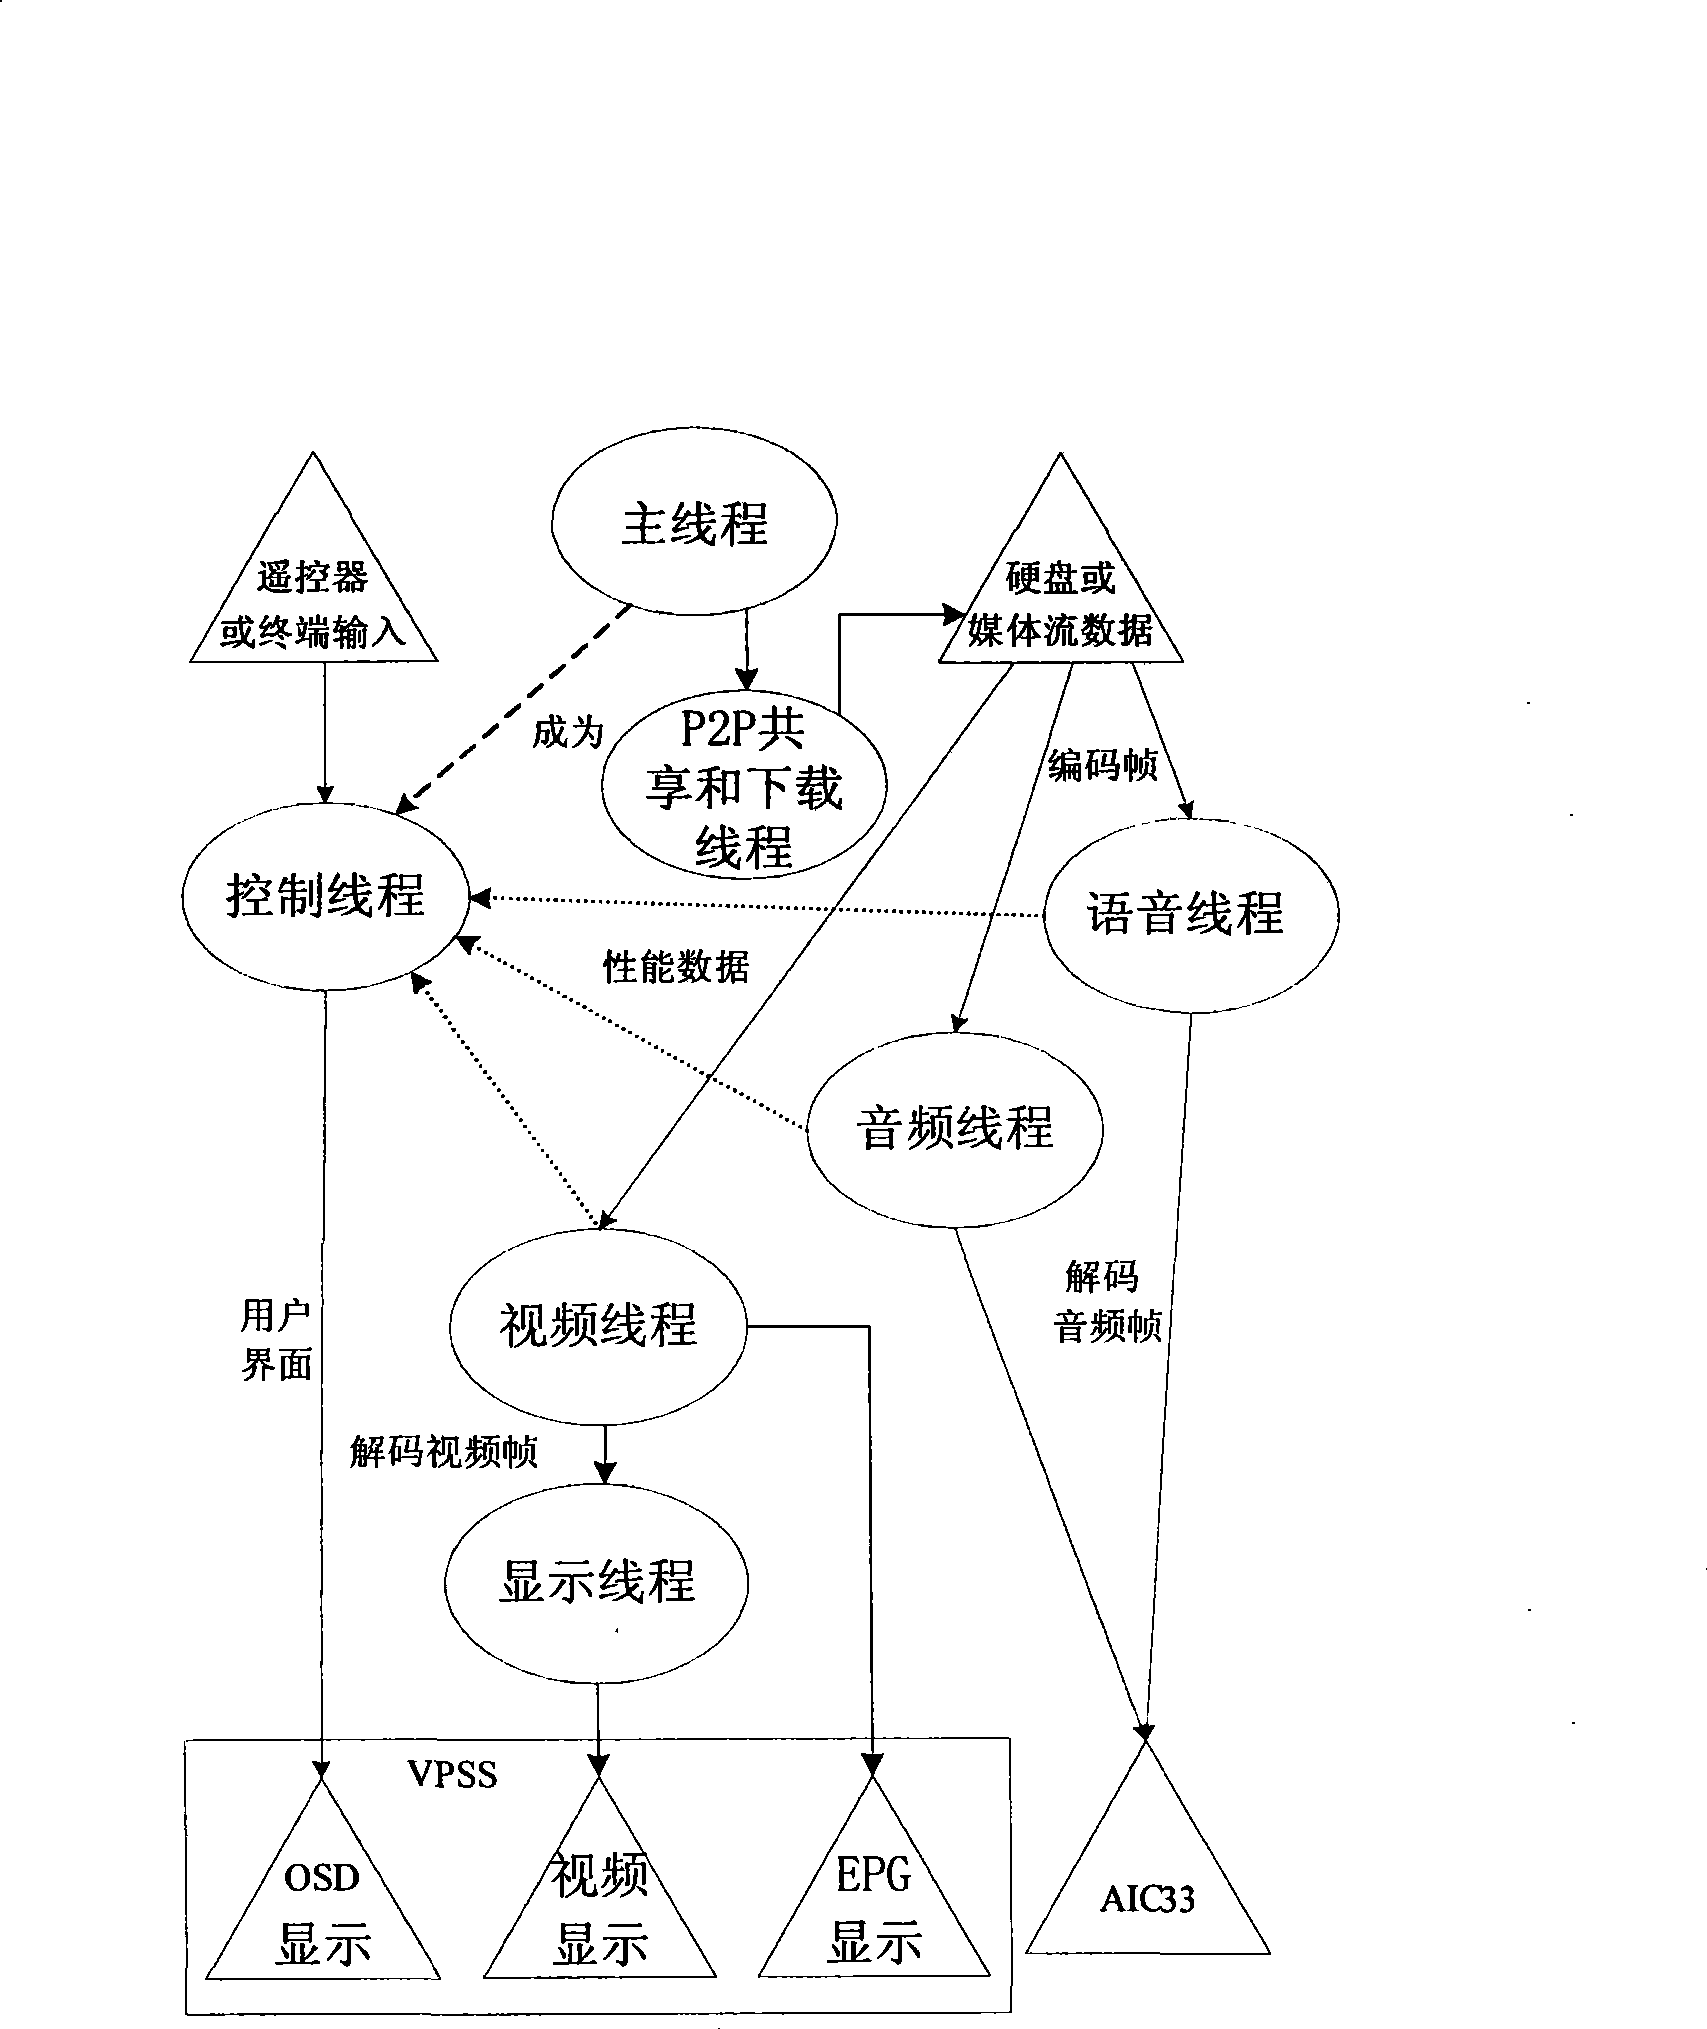 Control method for peer-to-peer calculation set-top box player